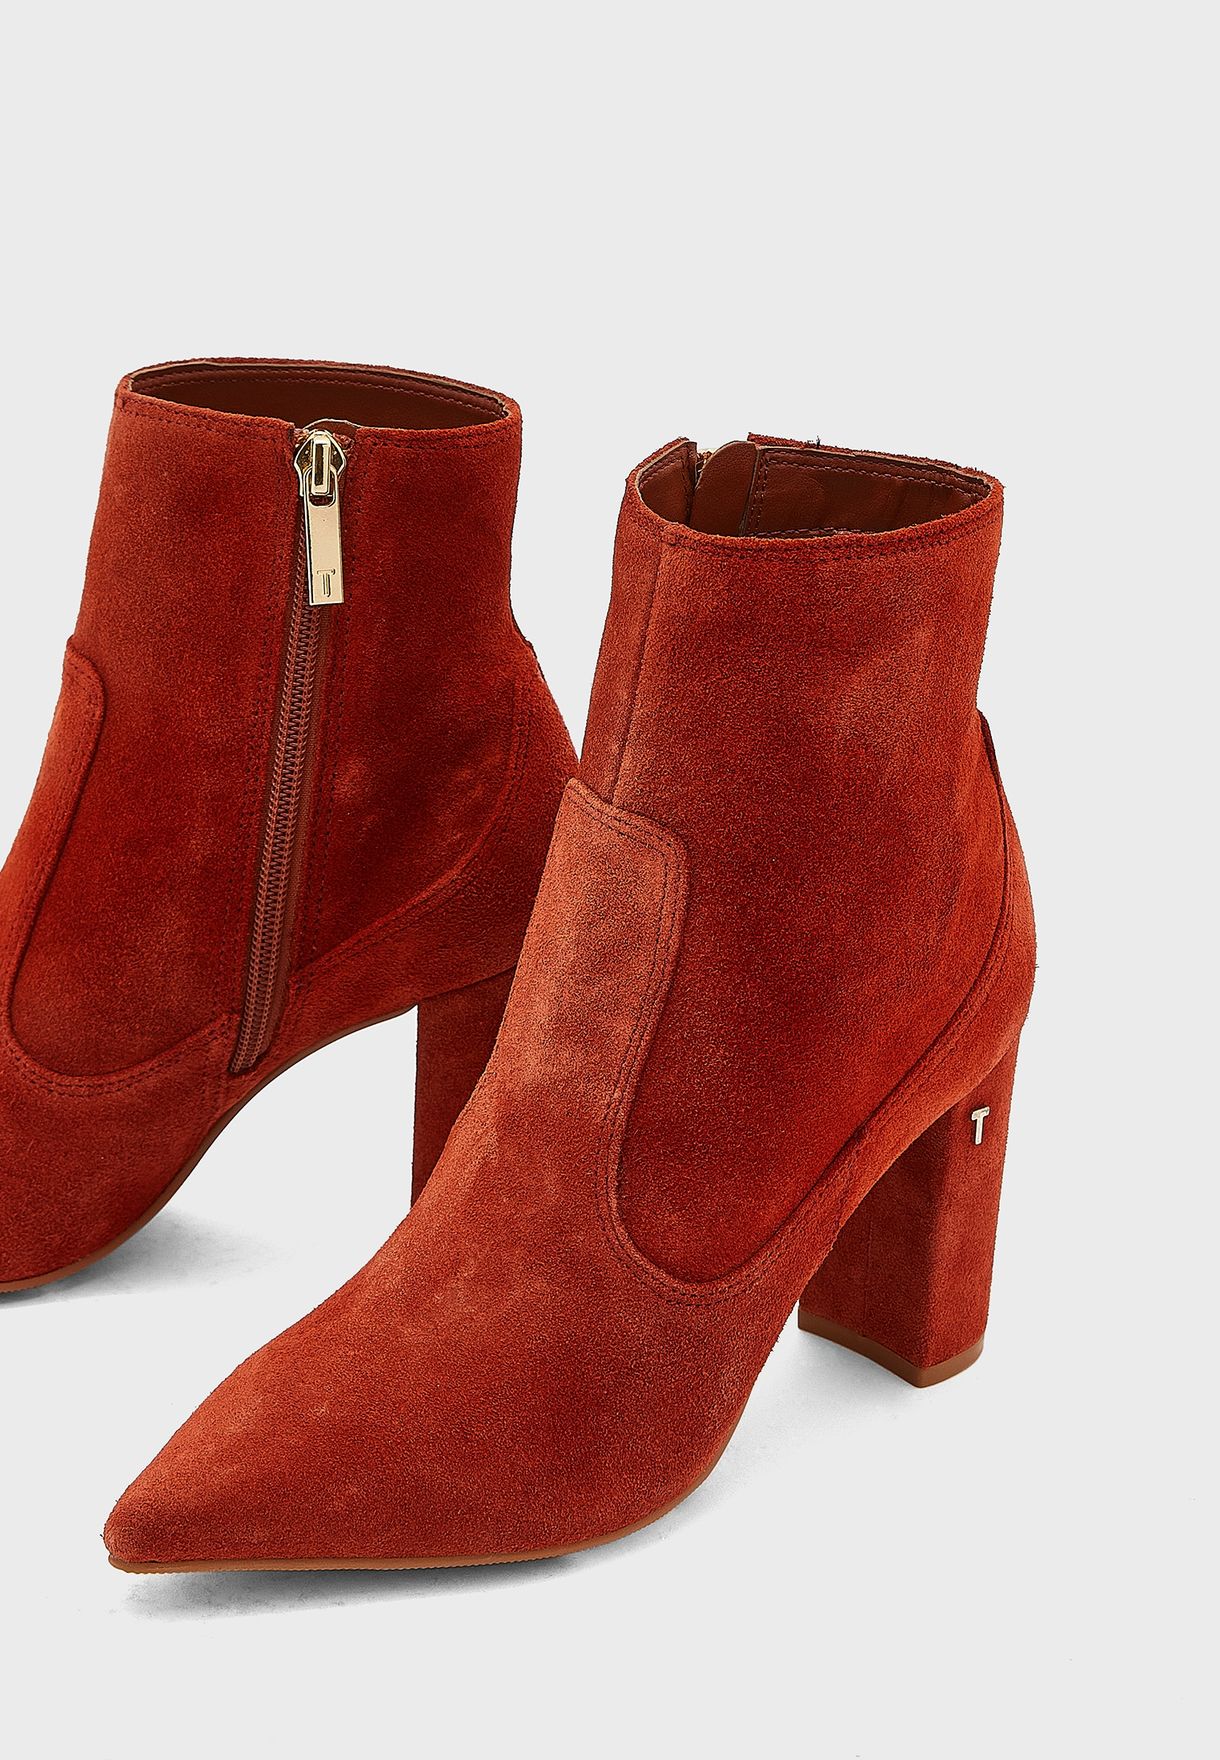 Nyshaa Suede Block Heel Ankle Boots